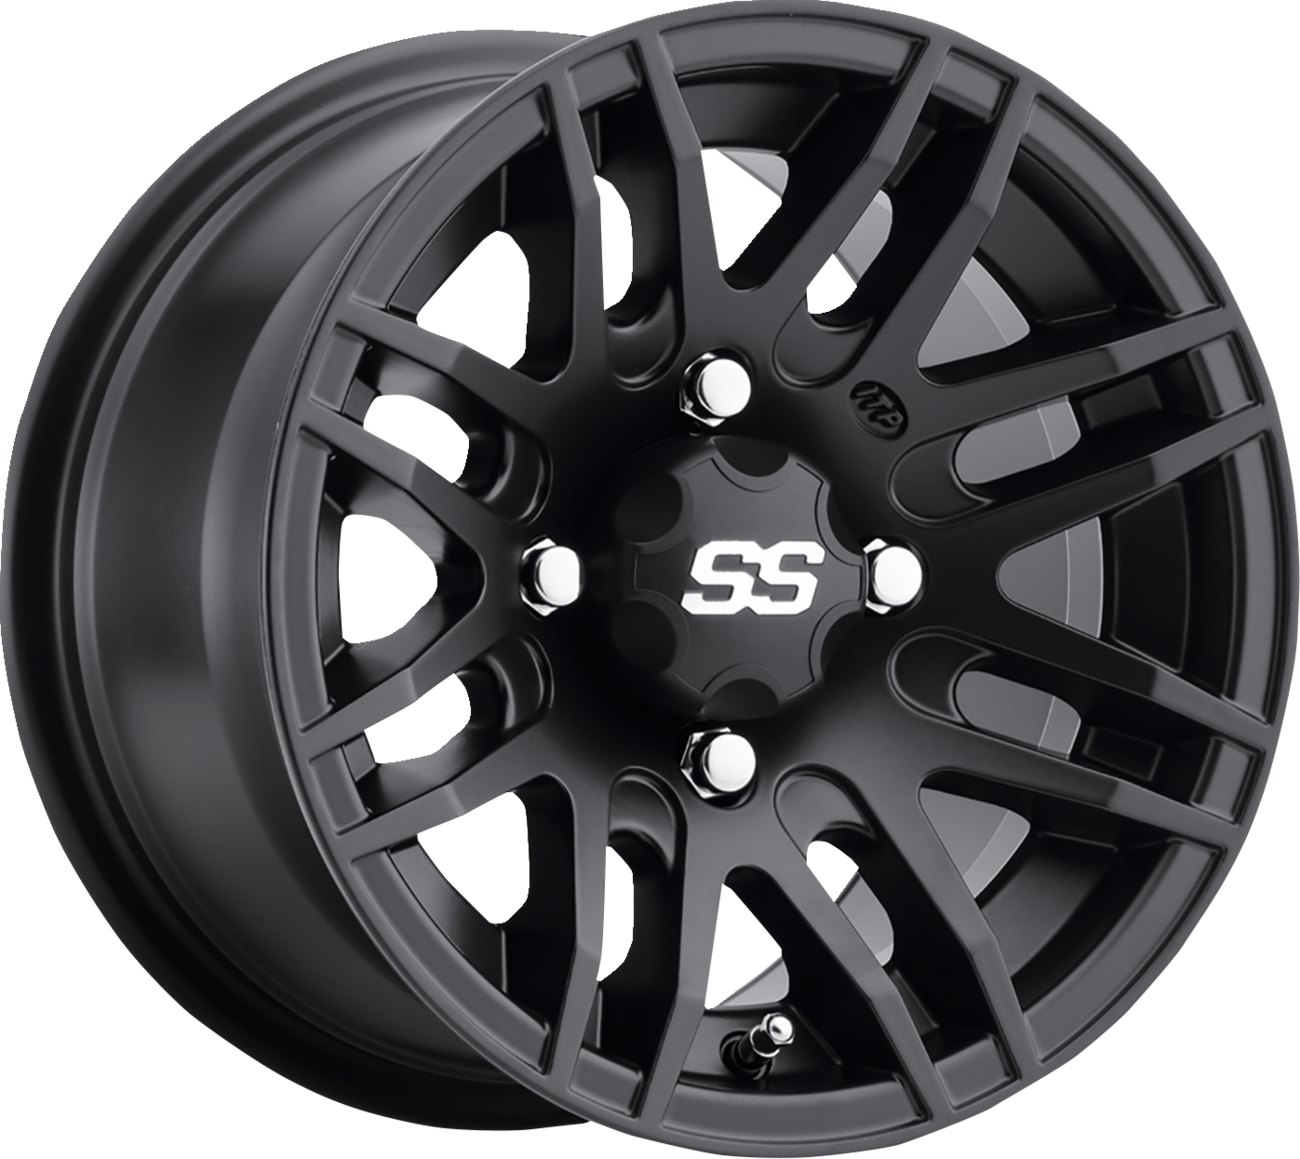 ITP SS316 Alloy Wheel - Front/Rear - Machined Black - 14x7 - 4/110 - 5+2 1428560536B